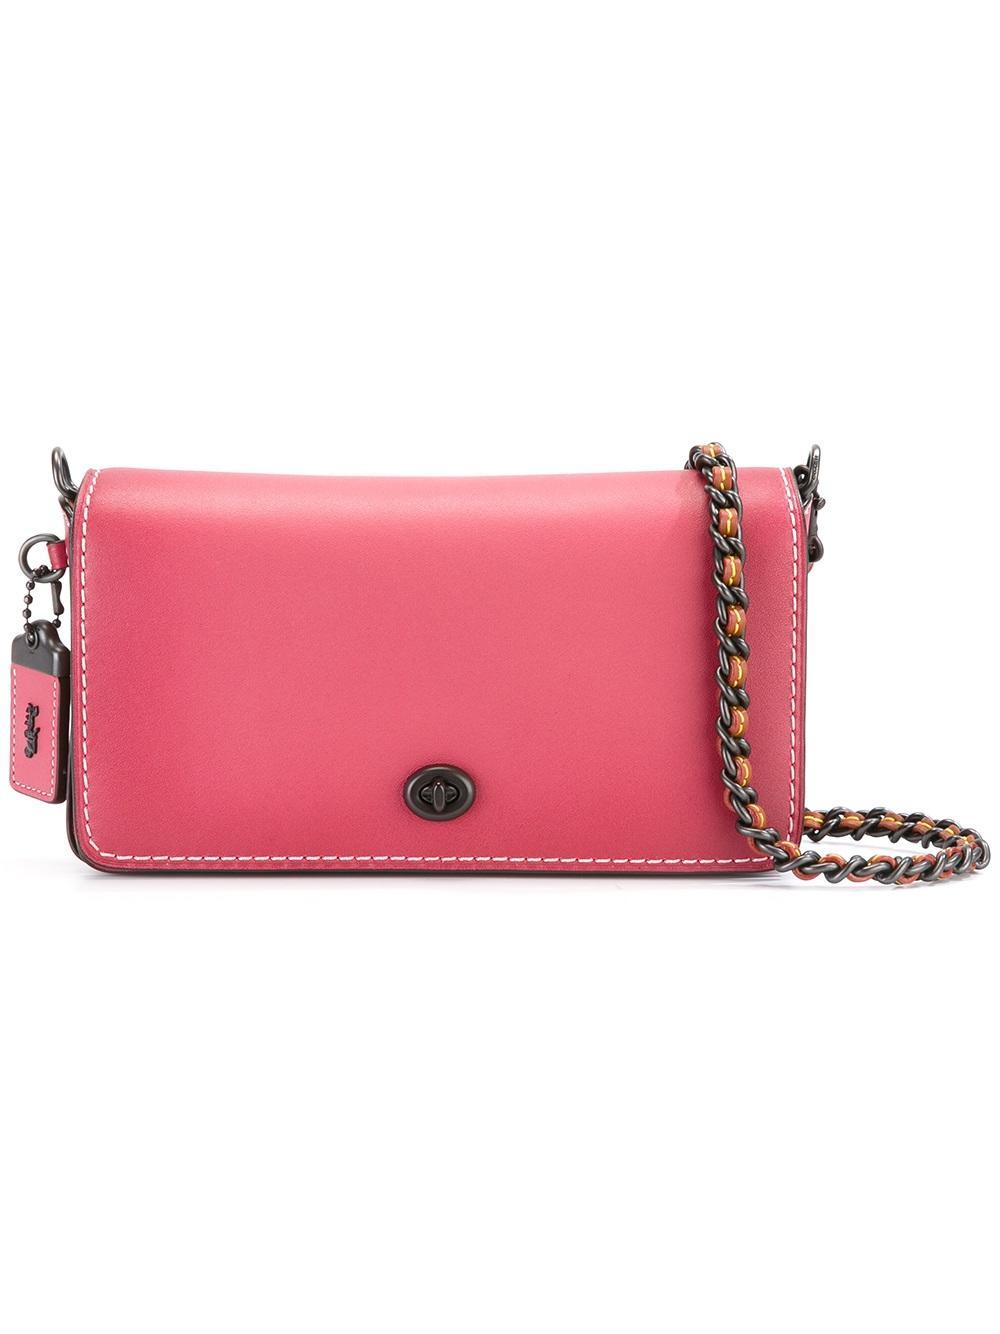 COACH Leather Chain Strap Crossbody Bag in Pink/Purple (Pink) - Lyst